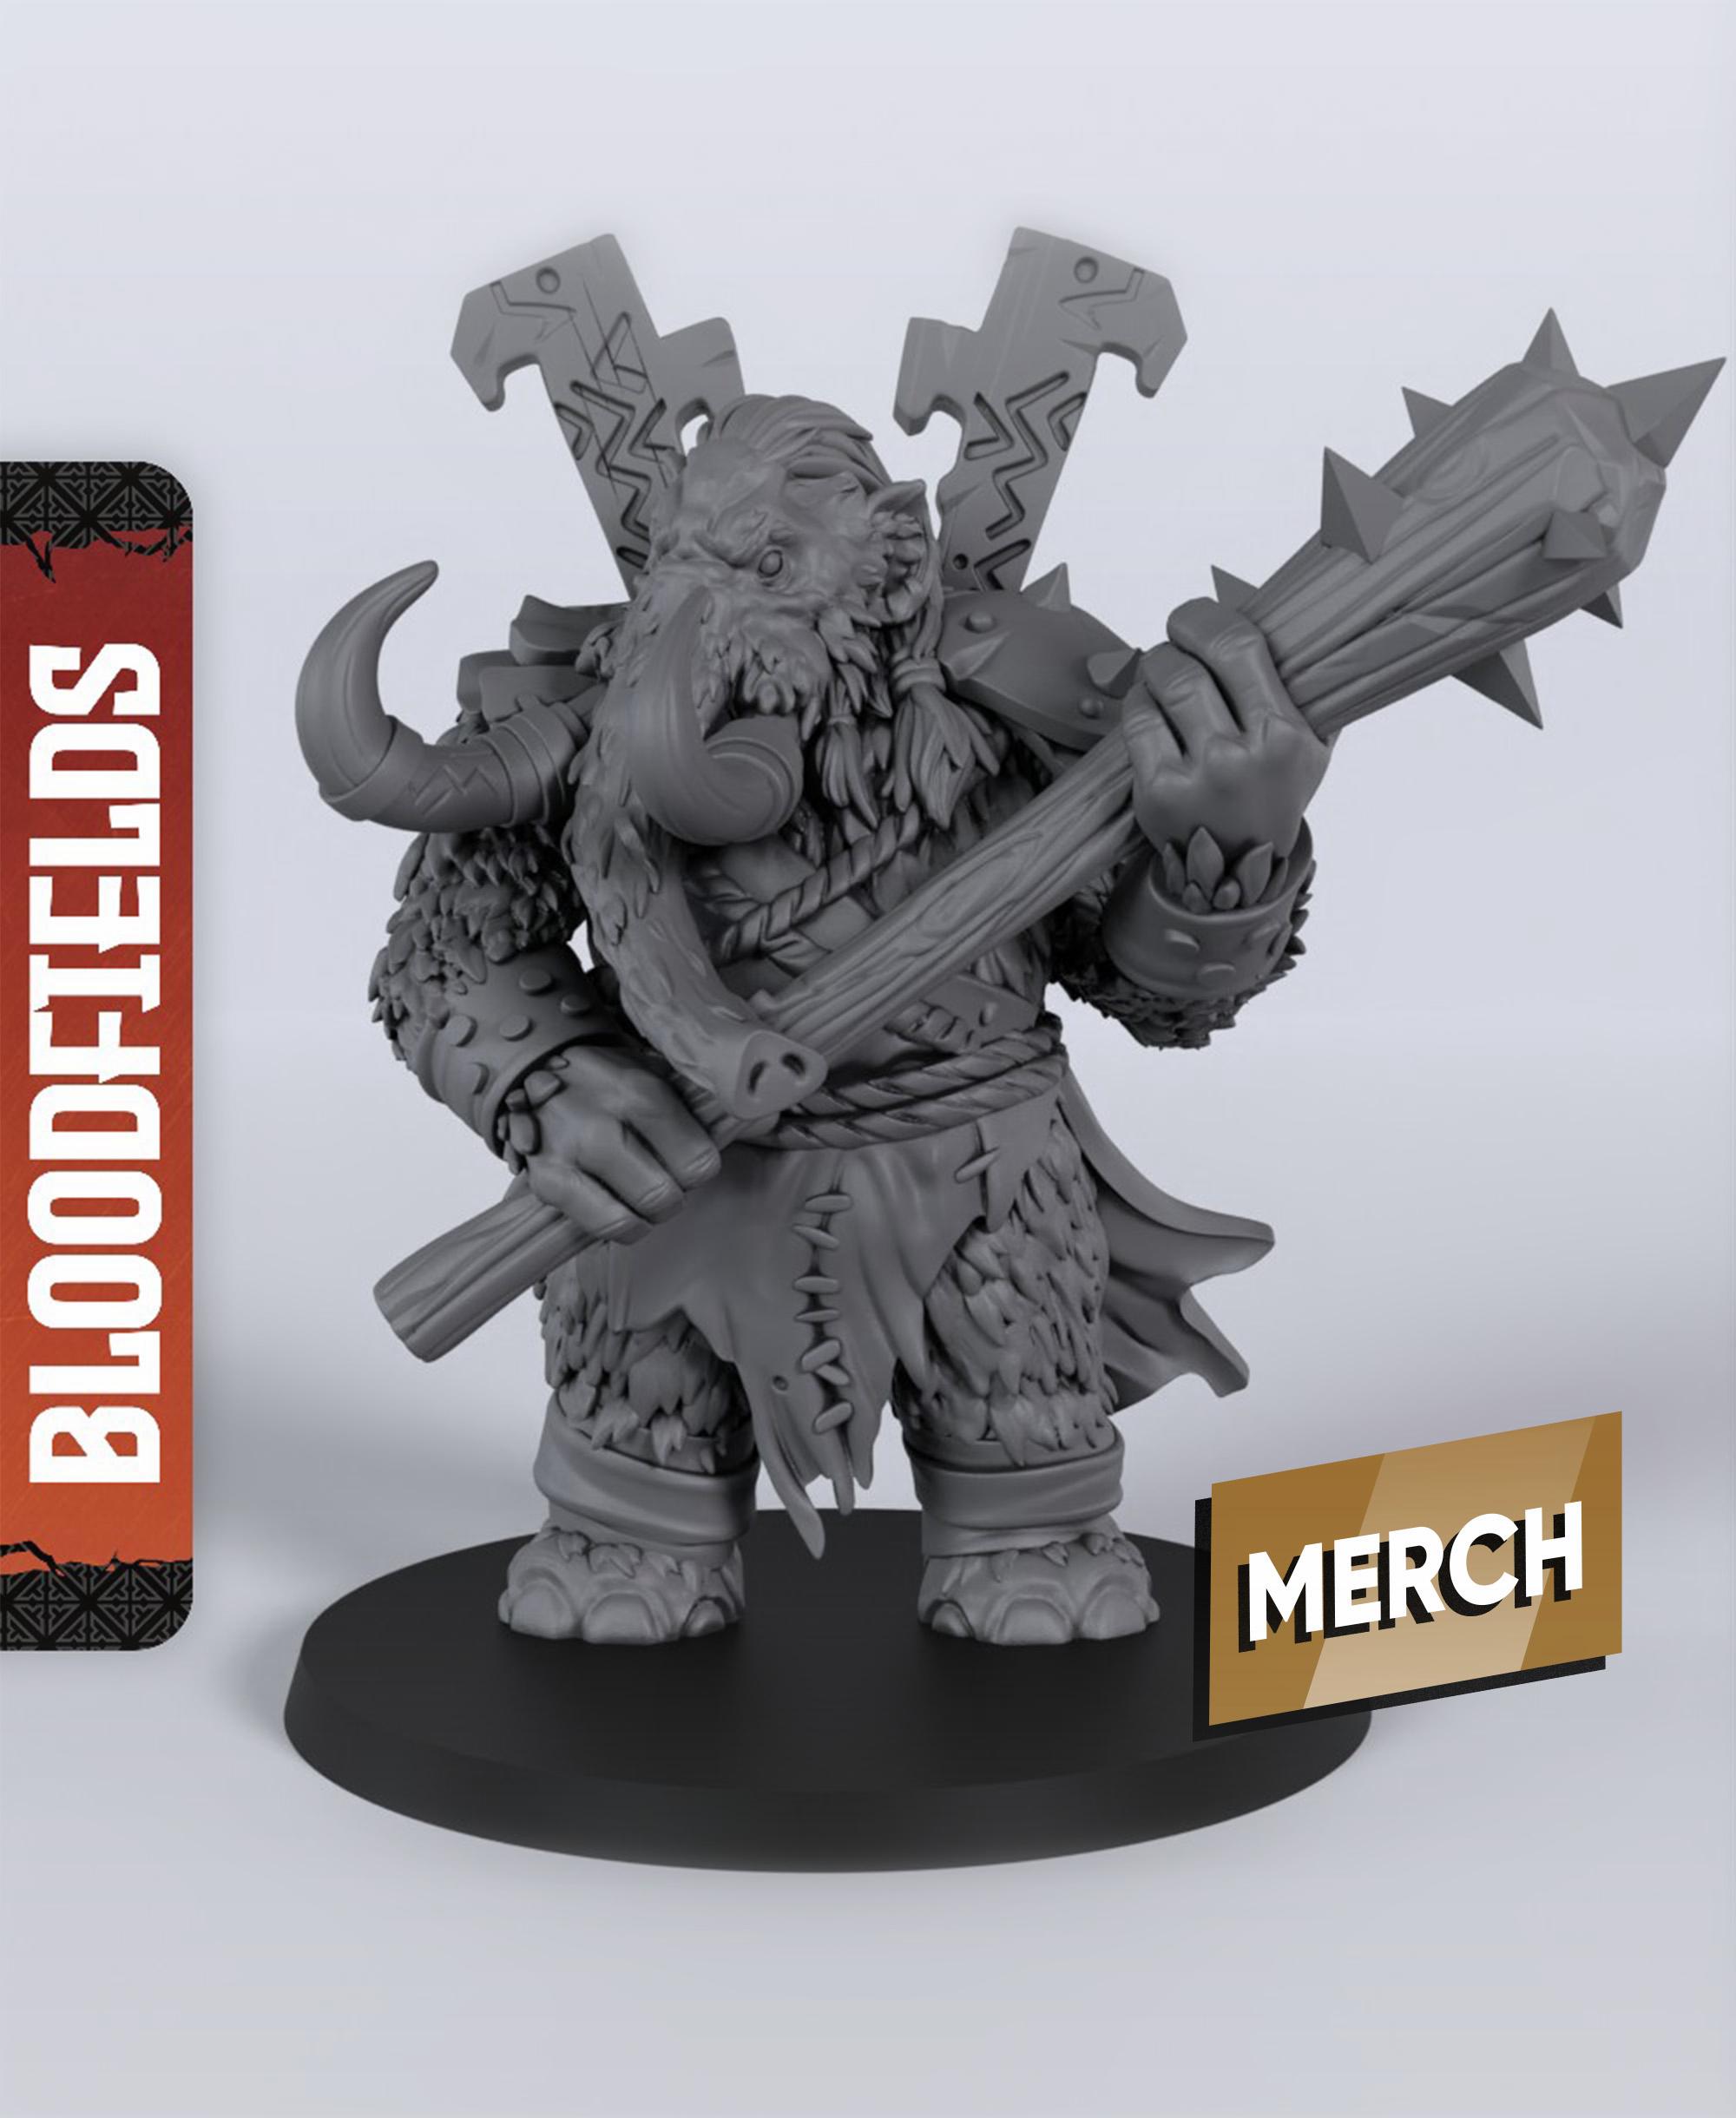 Vishal (Weremammoth) - With Free Dragon Warhammer - 5e DnD Inspired for RPG and Wargamers 3d model